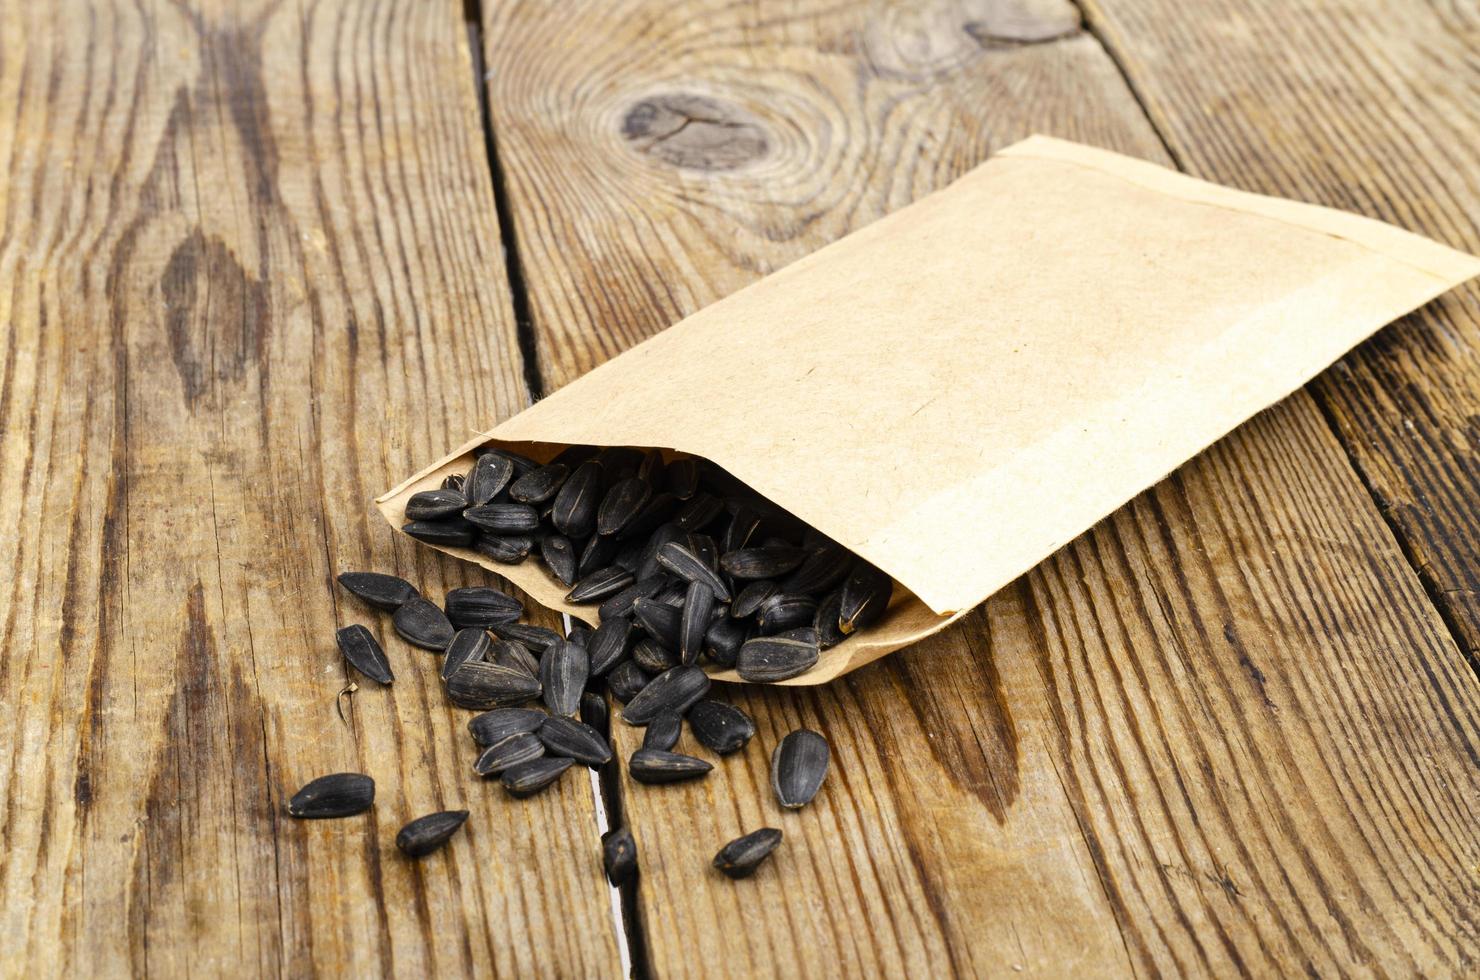 Black unpeeled sunflower seeds in craft bag on wooden table. photo